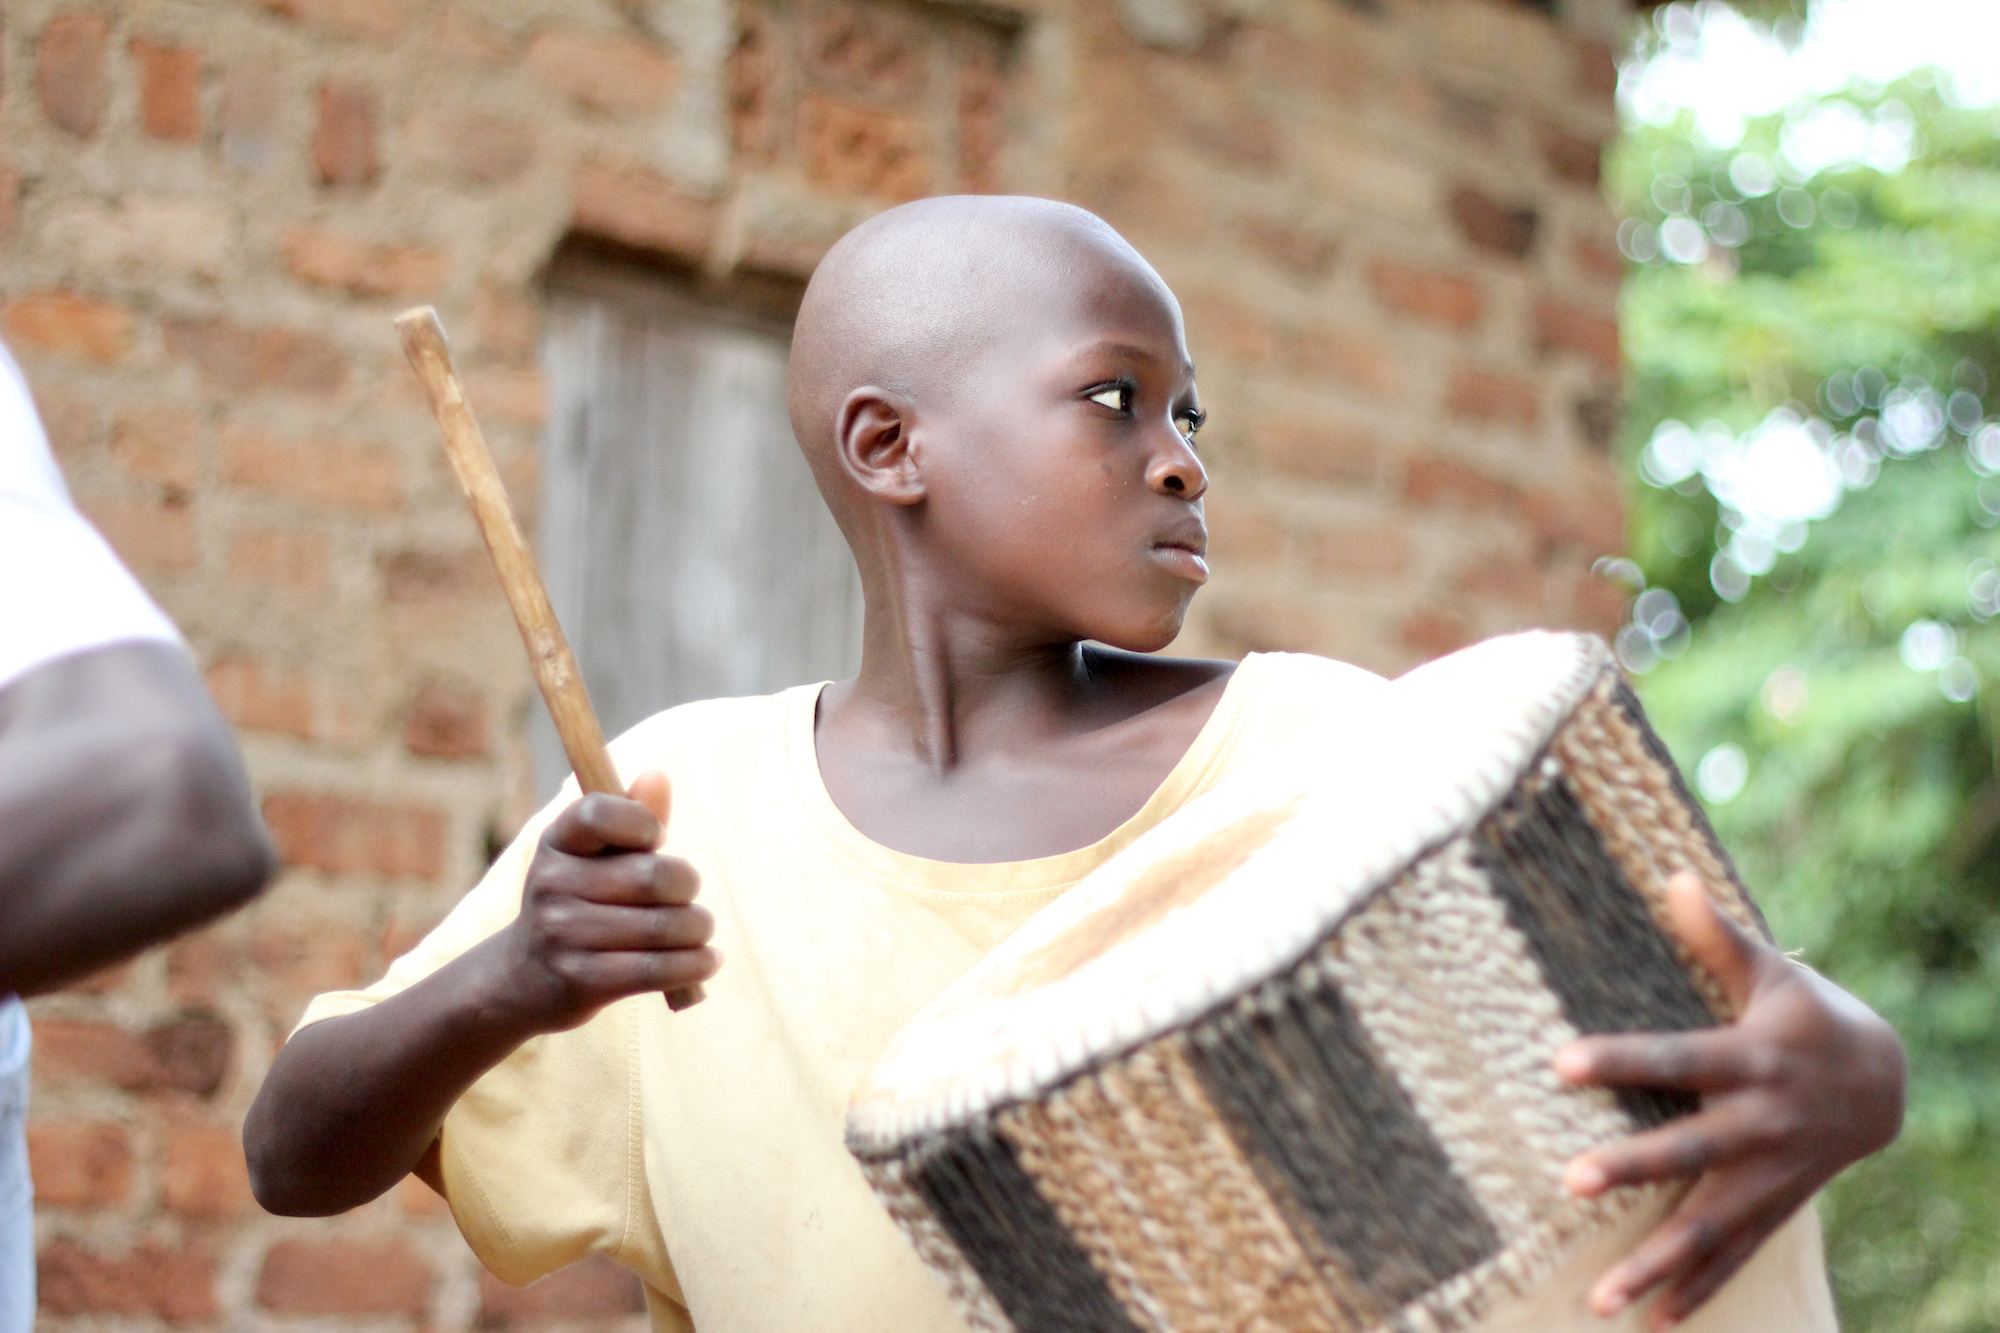 A young boy playing a drum